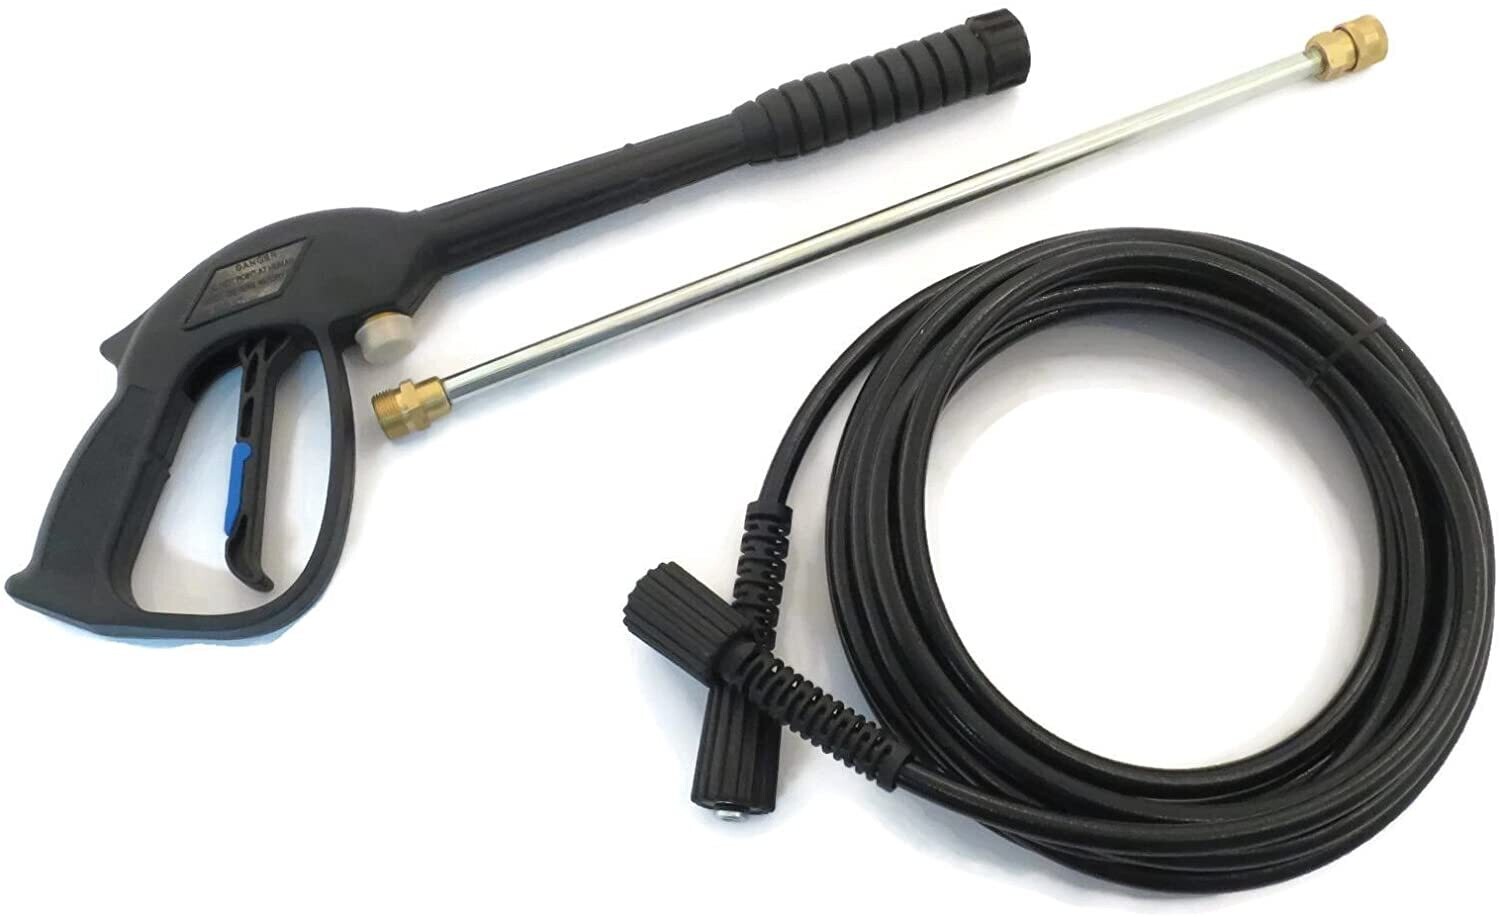 22MM HOSE AND 22MM GUN WITH LANCE KIT FOR 3000PSI GASOLINE PRESSURE WASHERS